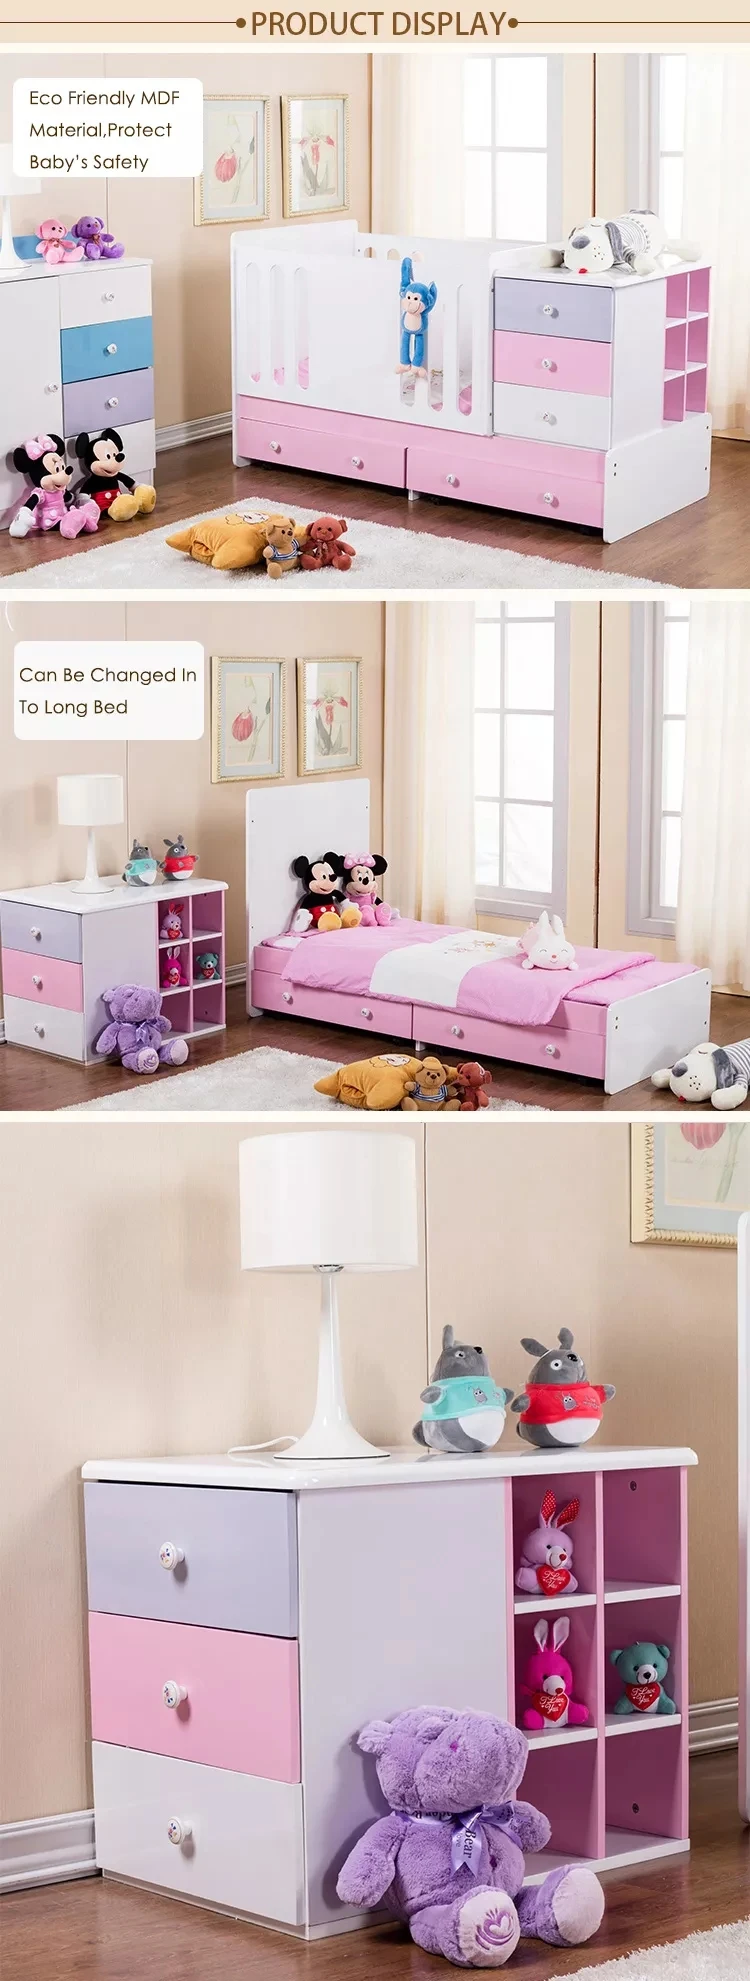 Foshan Wooden Furniture Kids Cribs Novel Cama Multifuncional Nio Bed Style Baby Cot Wooden Leander Bercea With Removable Drawers